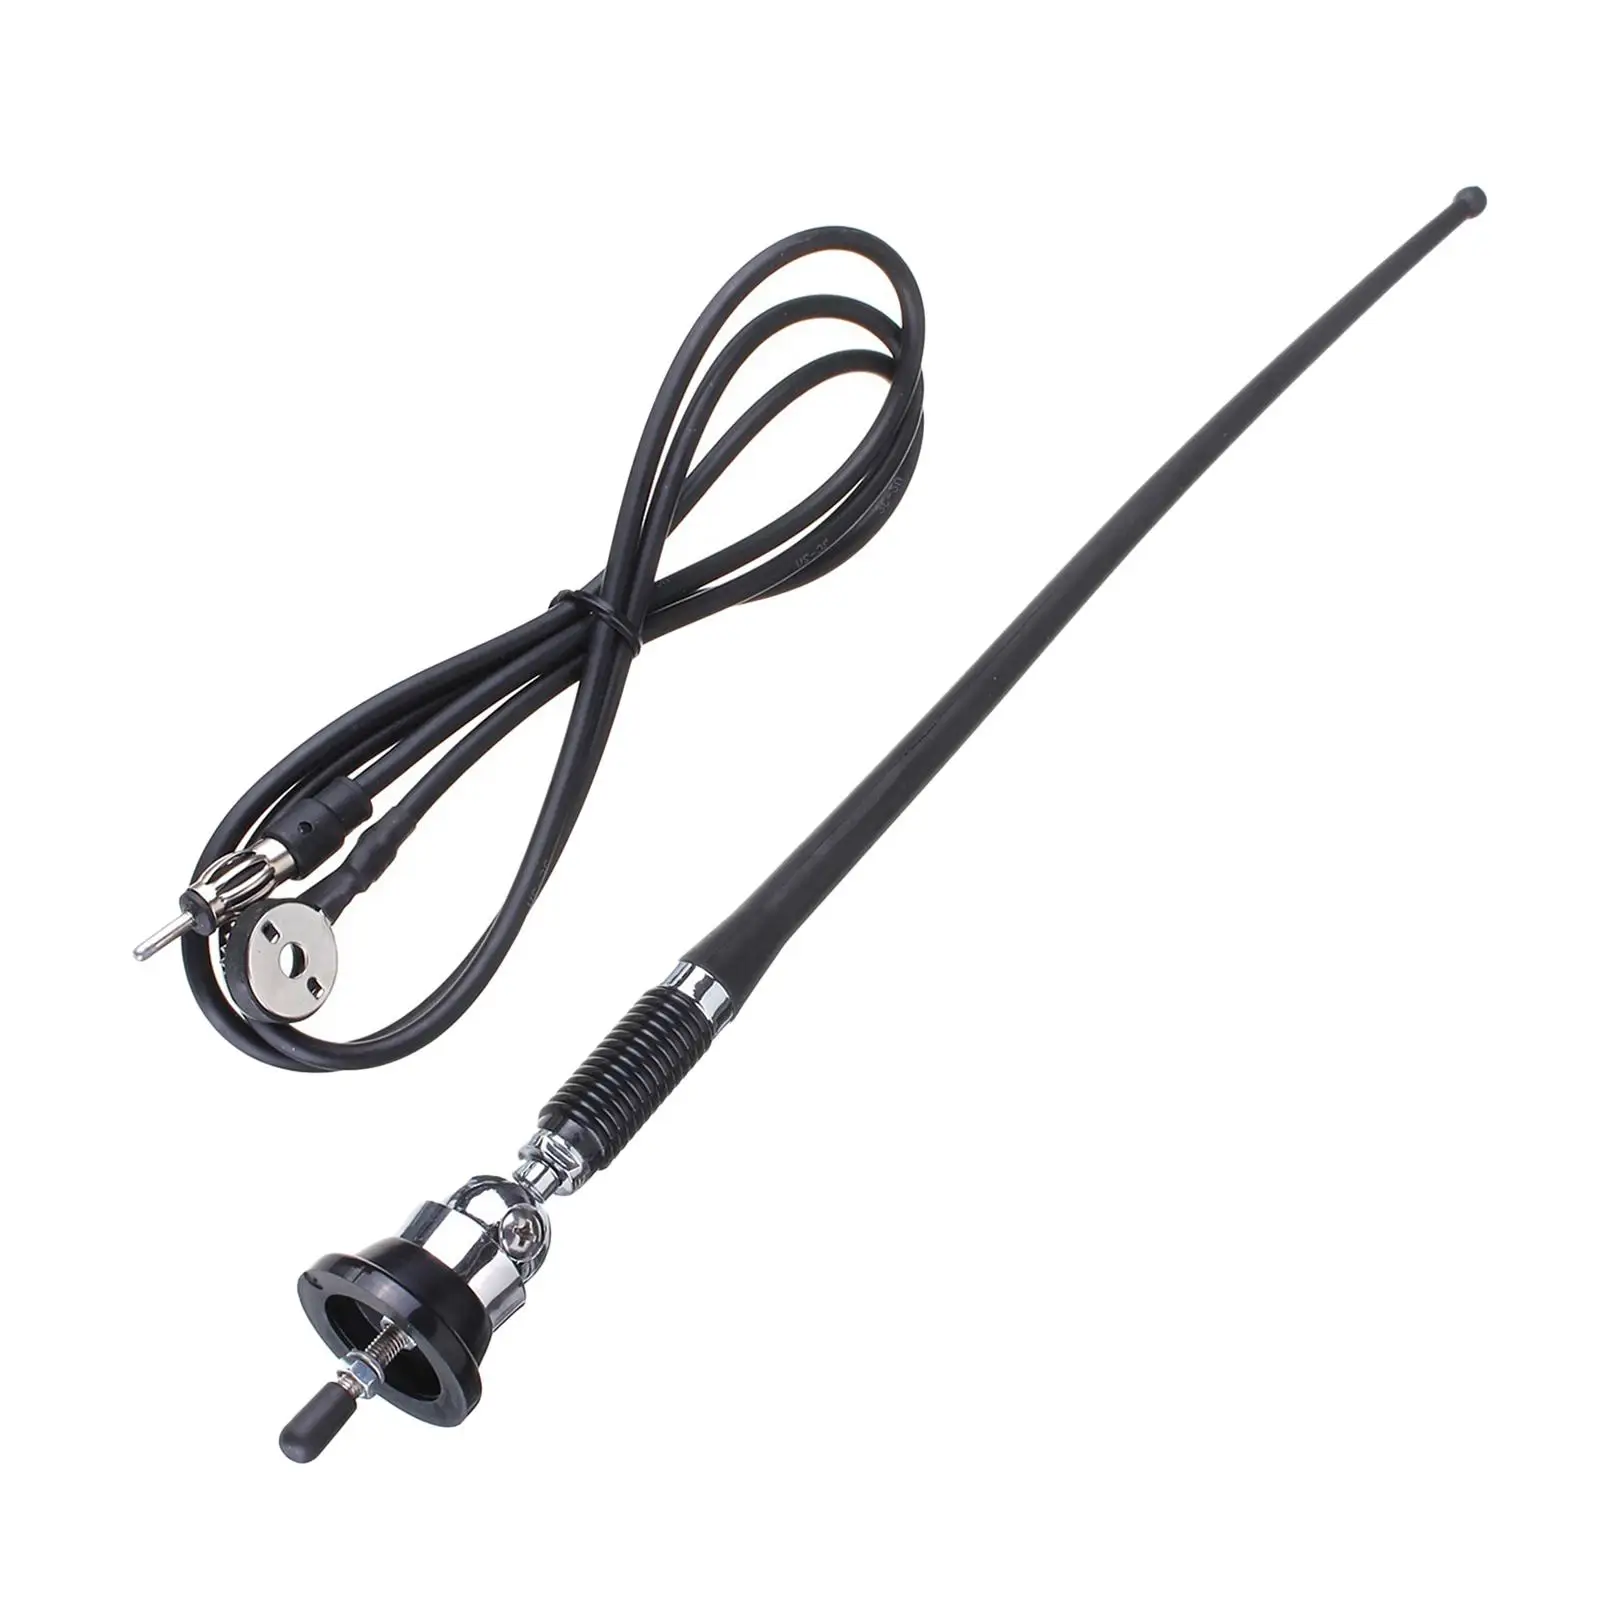 Universal Car Roof Antenna with Swivel Base Car Radio AM/FM Antenna   Antenna Replaces Rubber Adjustable Black